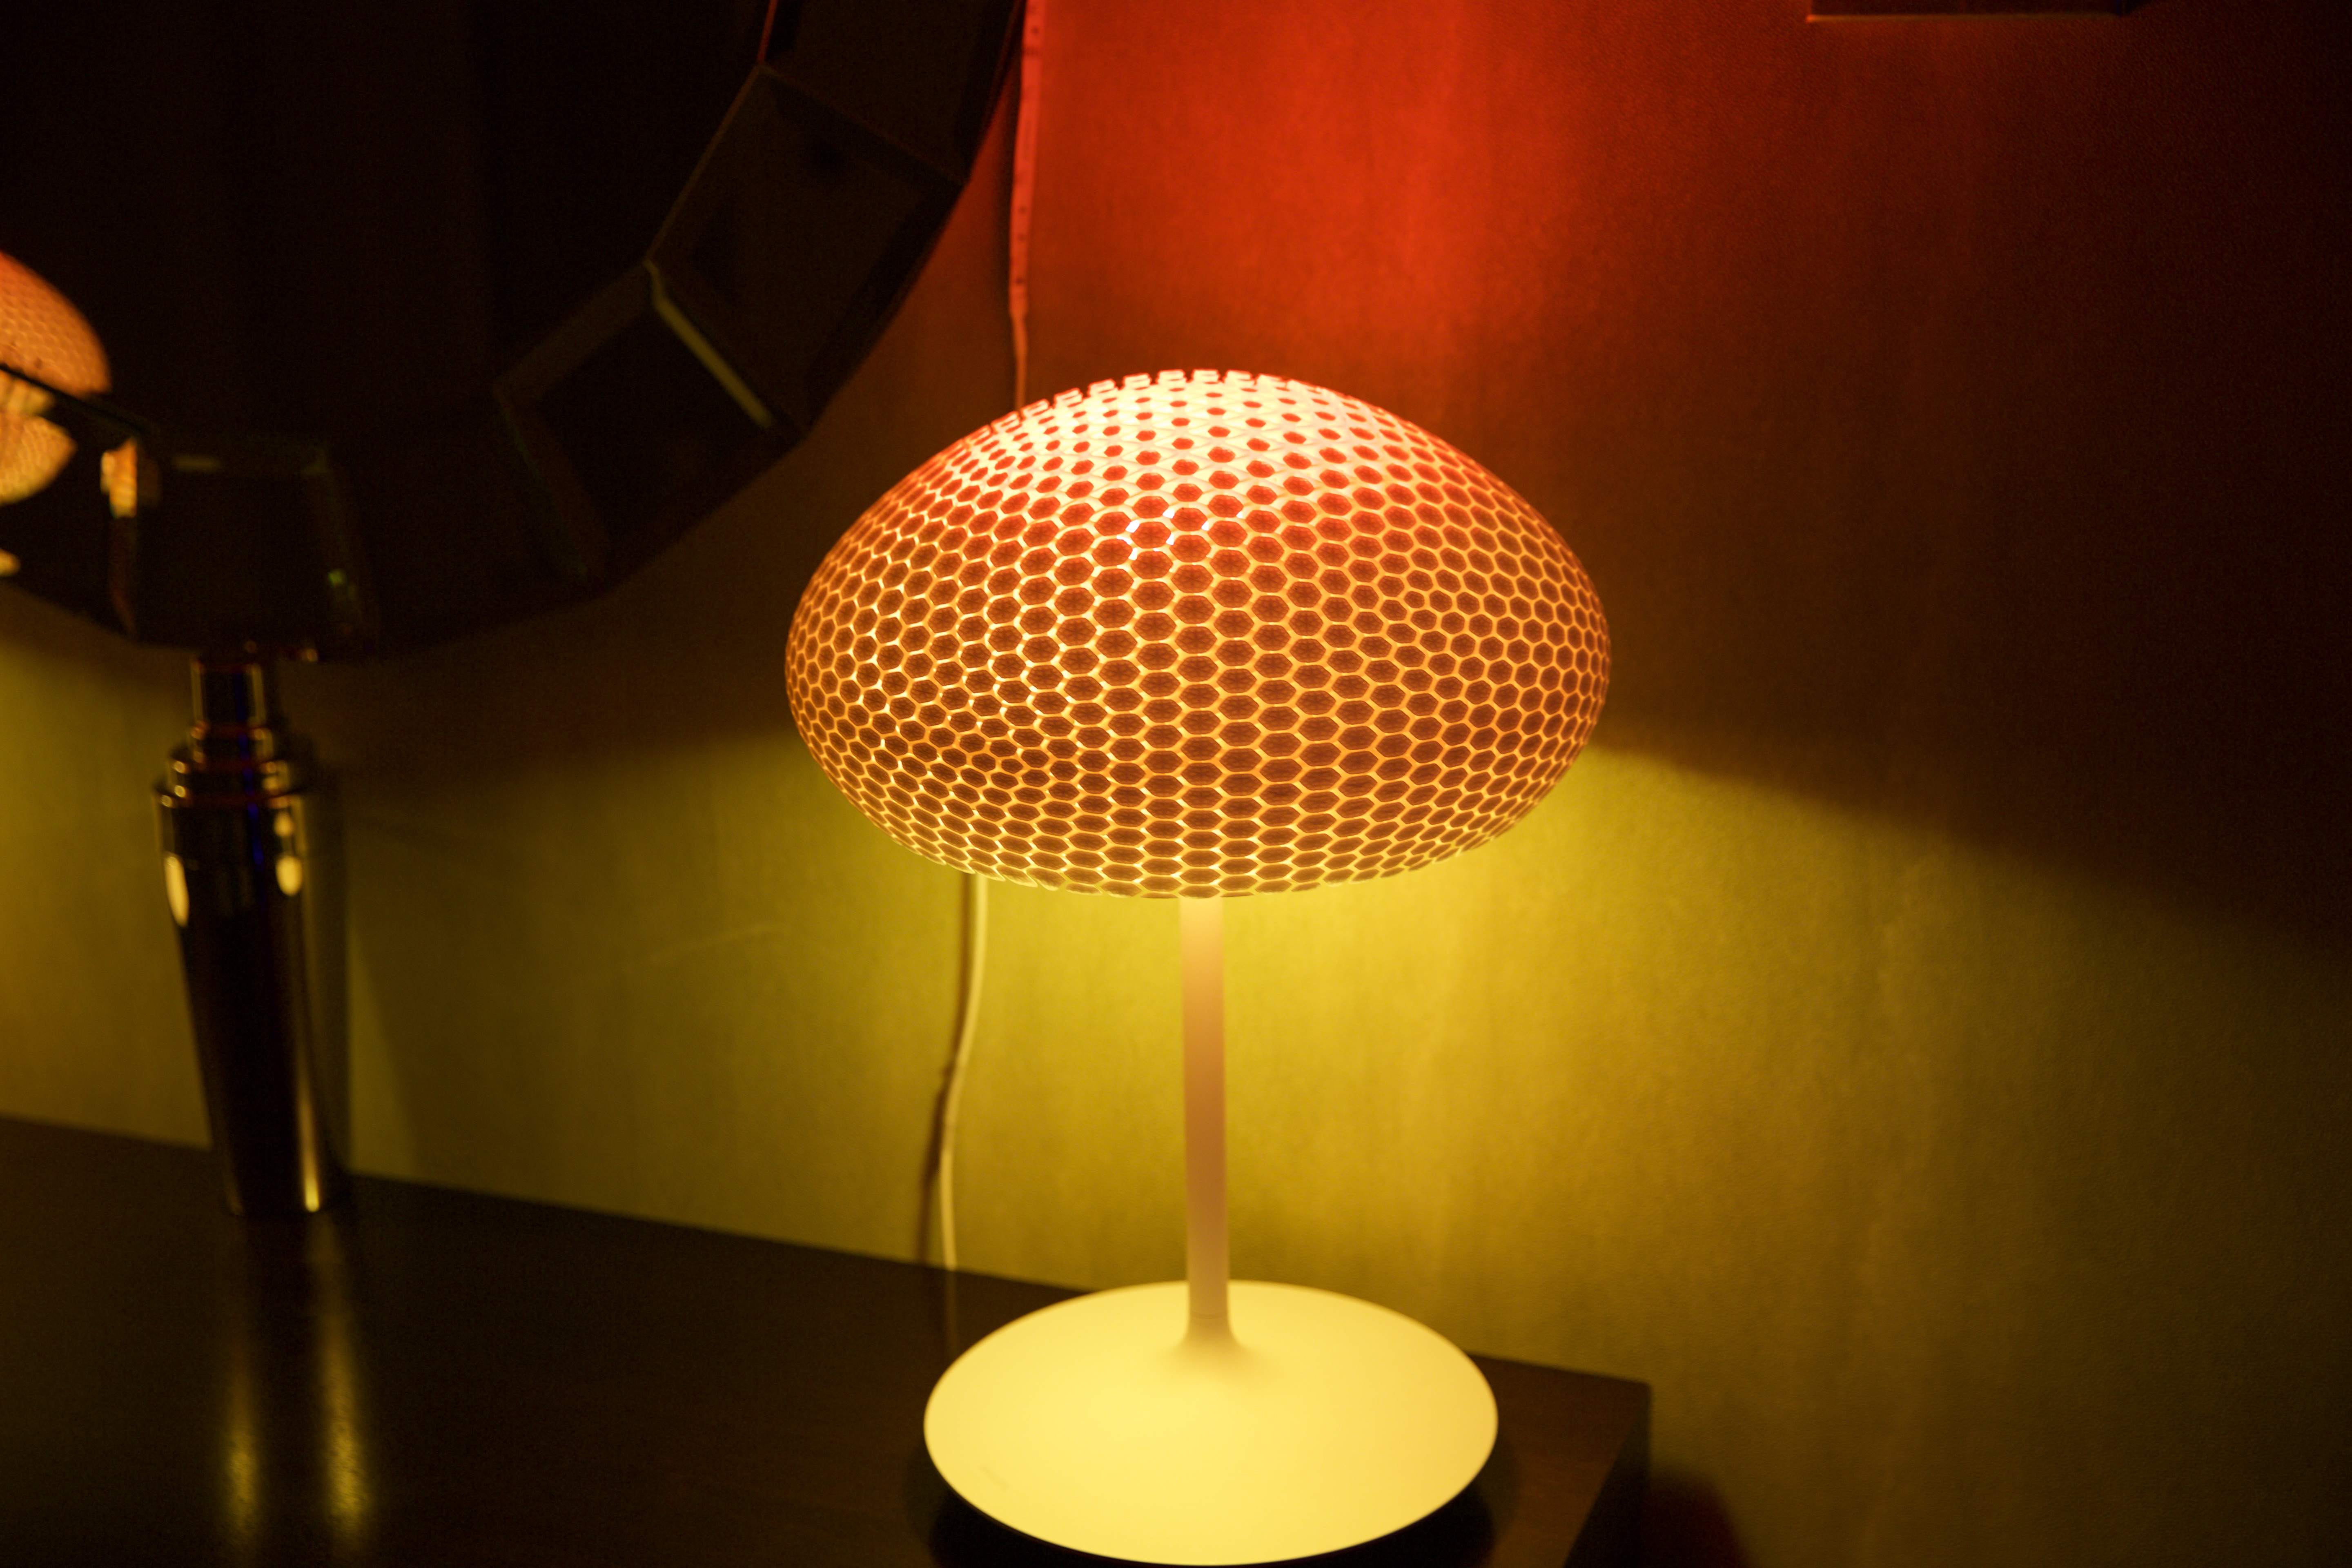 Philips Hue at CES—aiming to be more than just simple colored lights